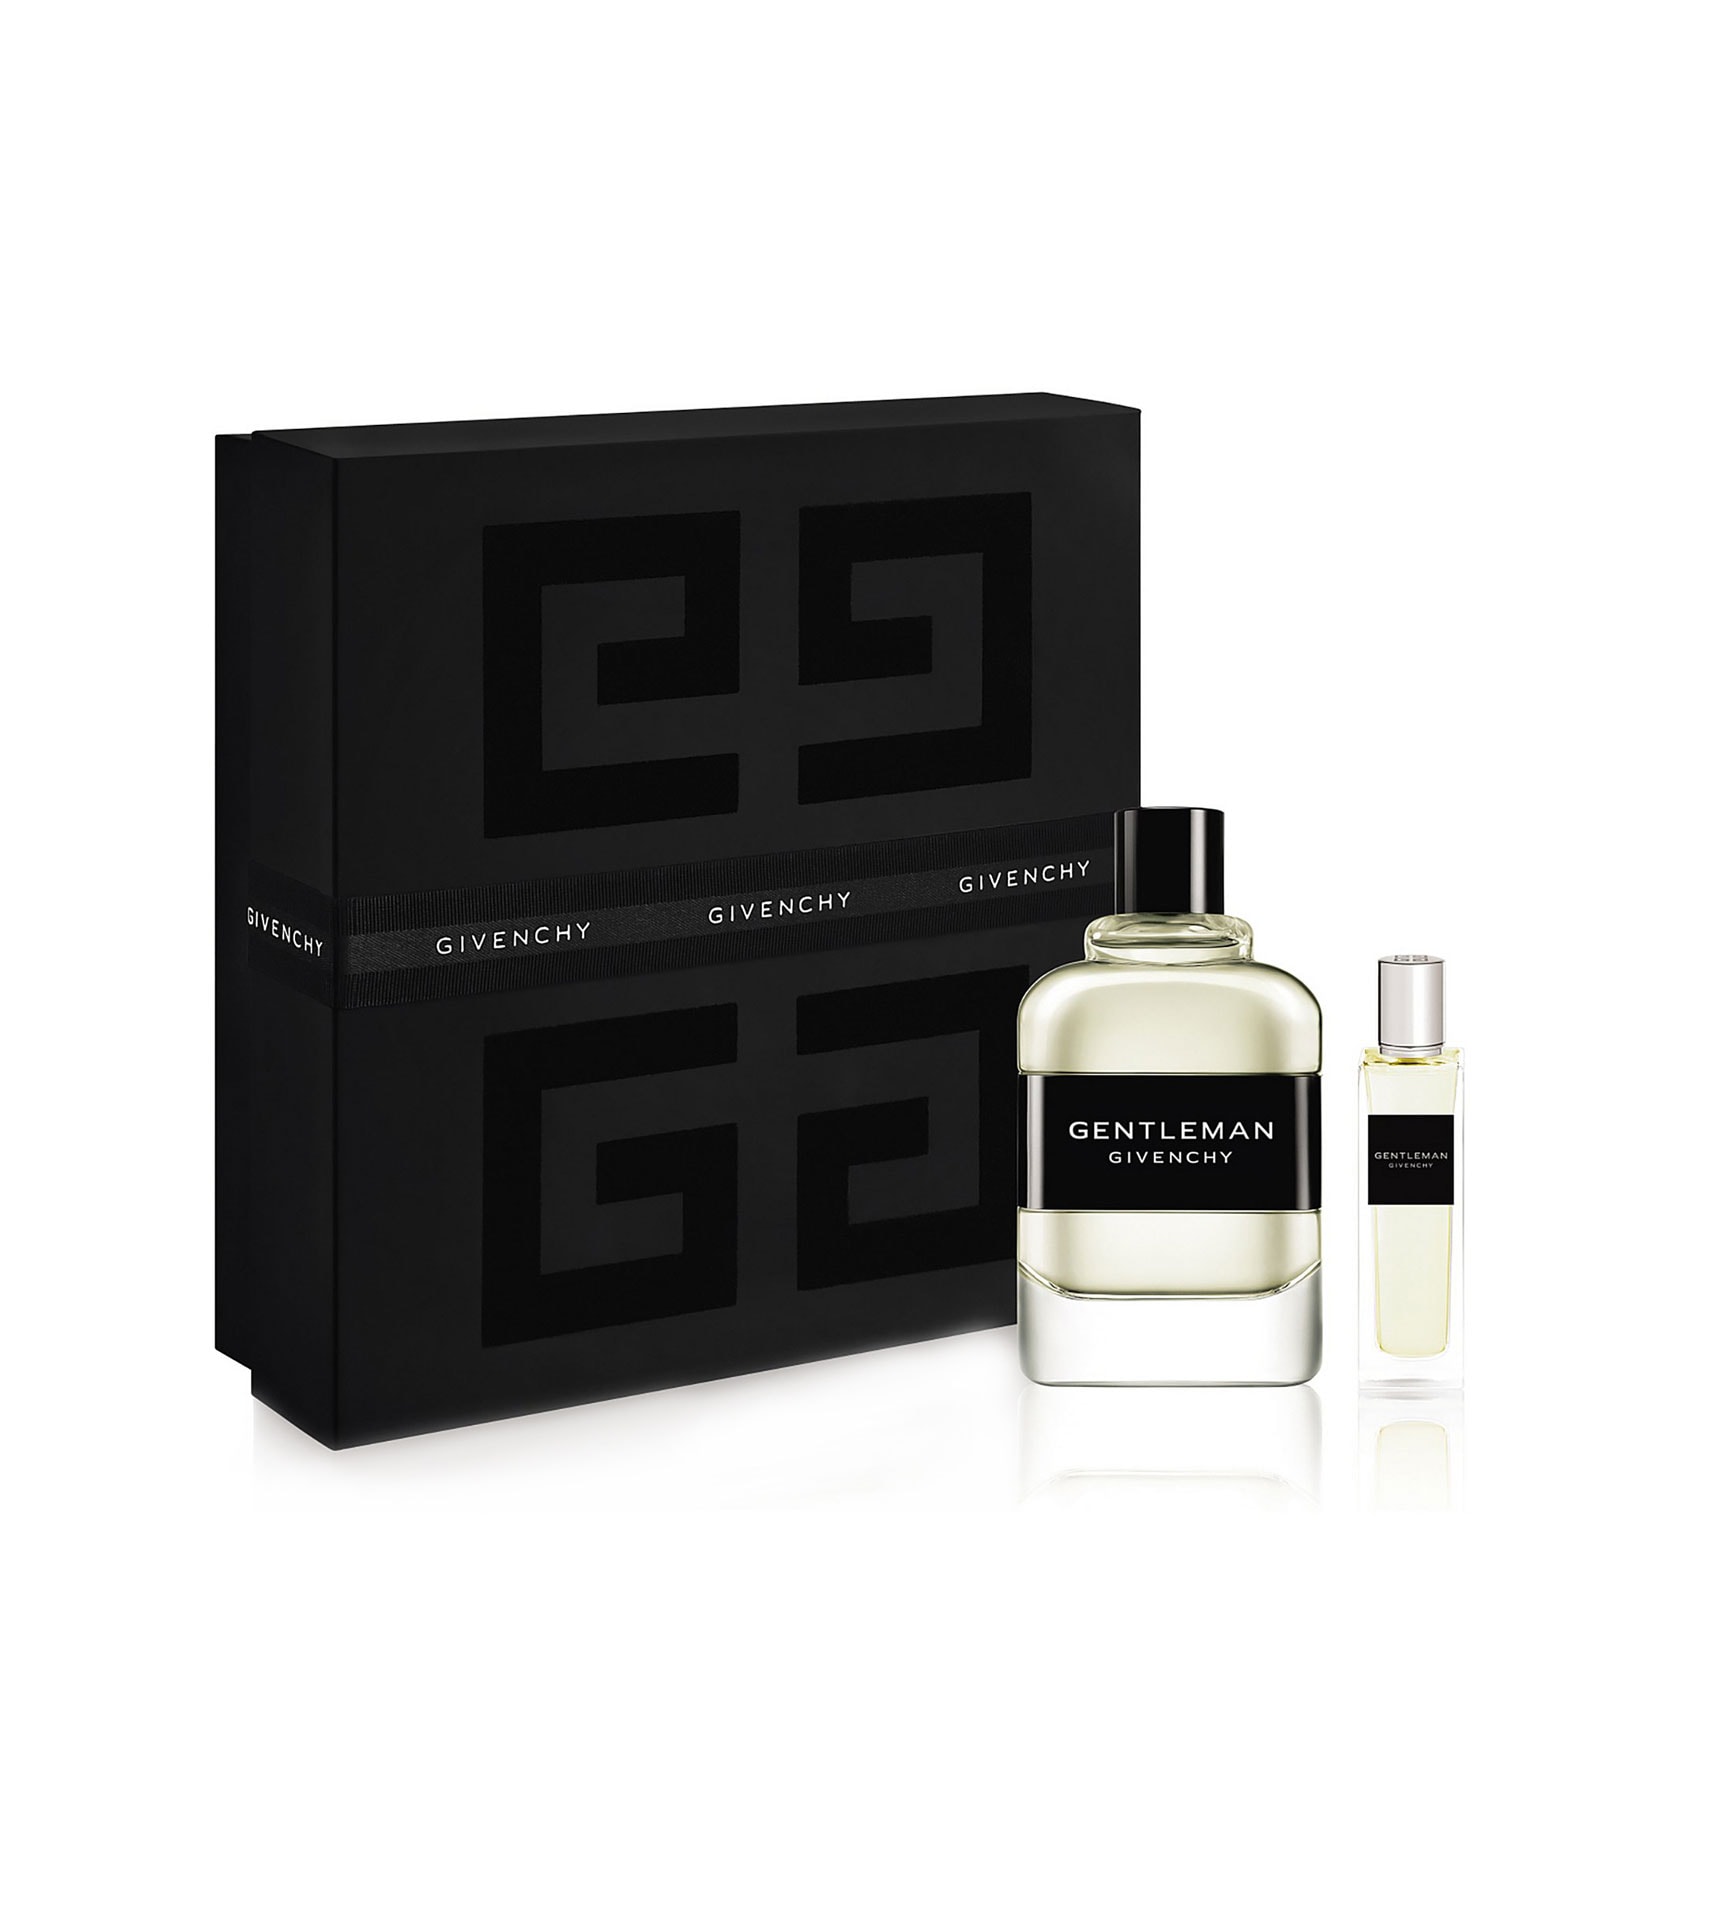 Gentlemen only Givenchy набор. Givenchy Gentleman Society. Givenchy product PNG.